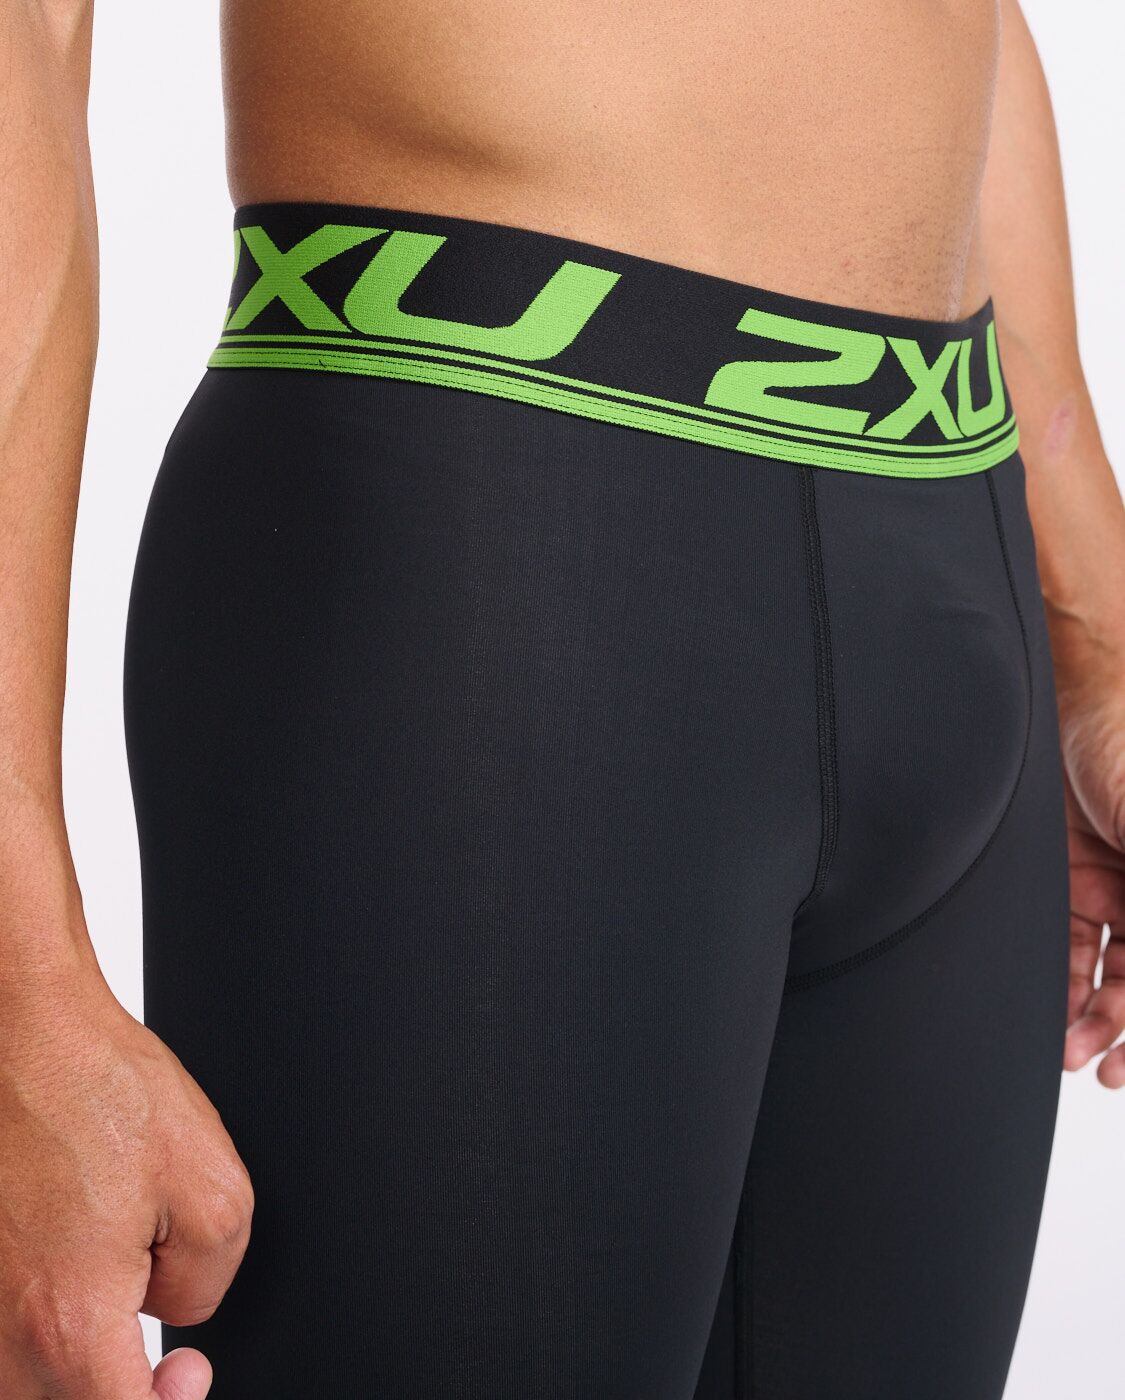 Canada Tropisk whisky Power Recovery compression Tights – 2XU